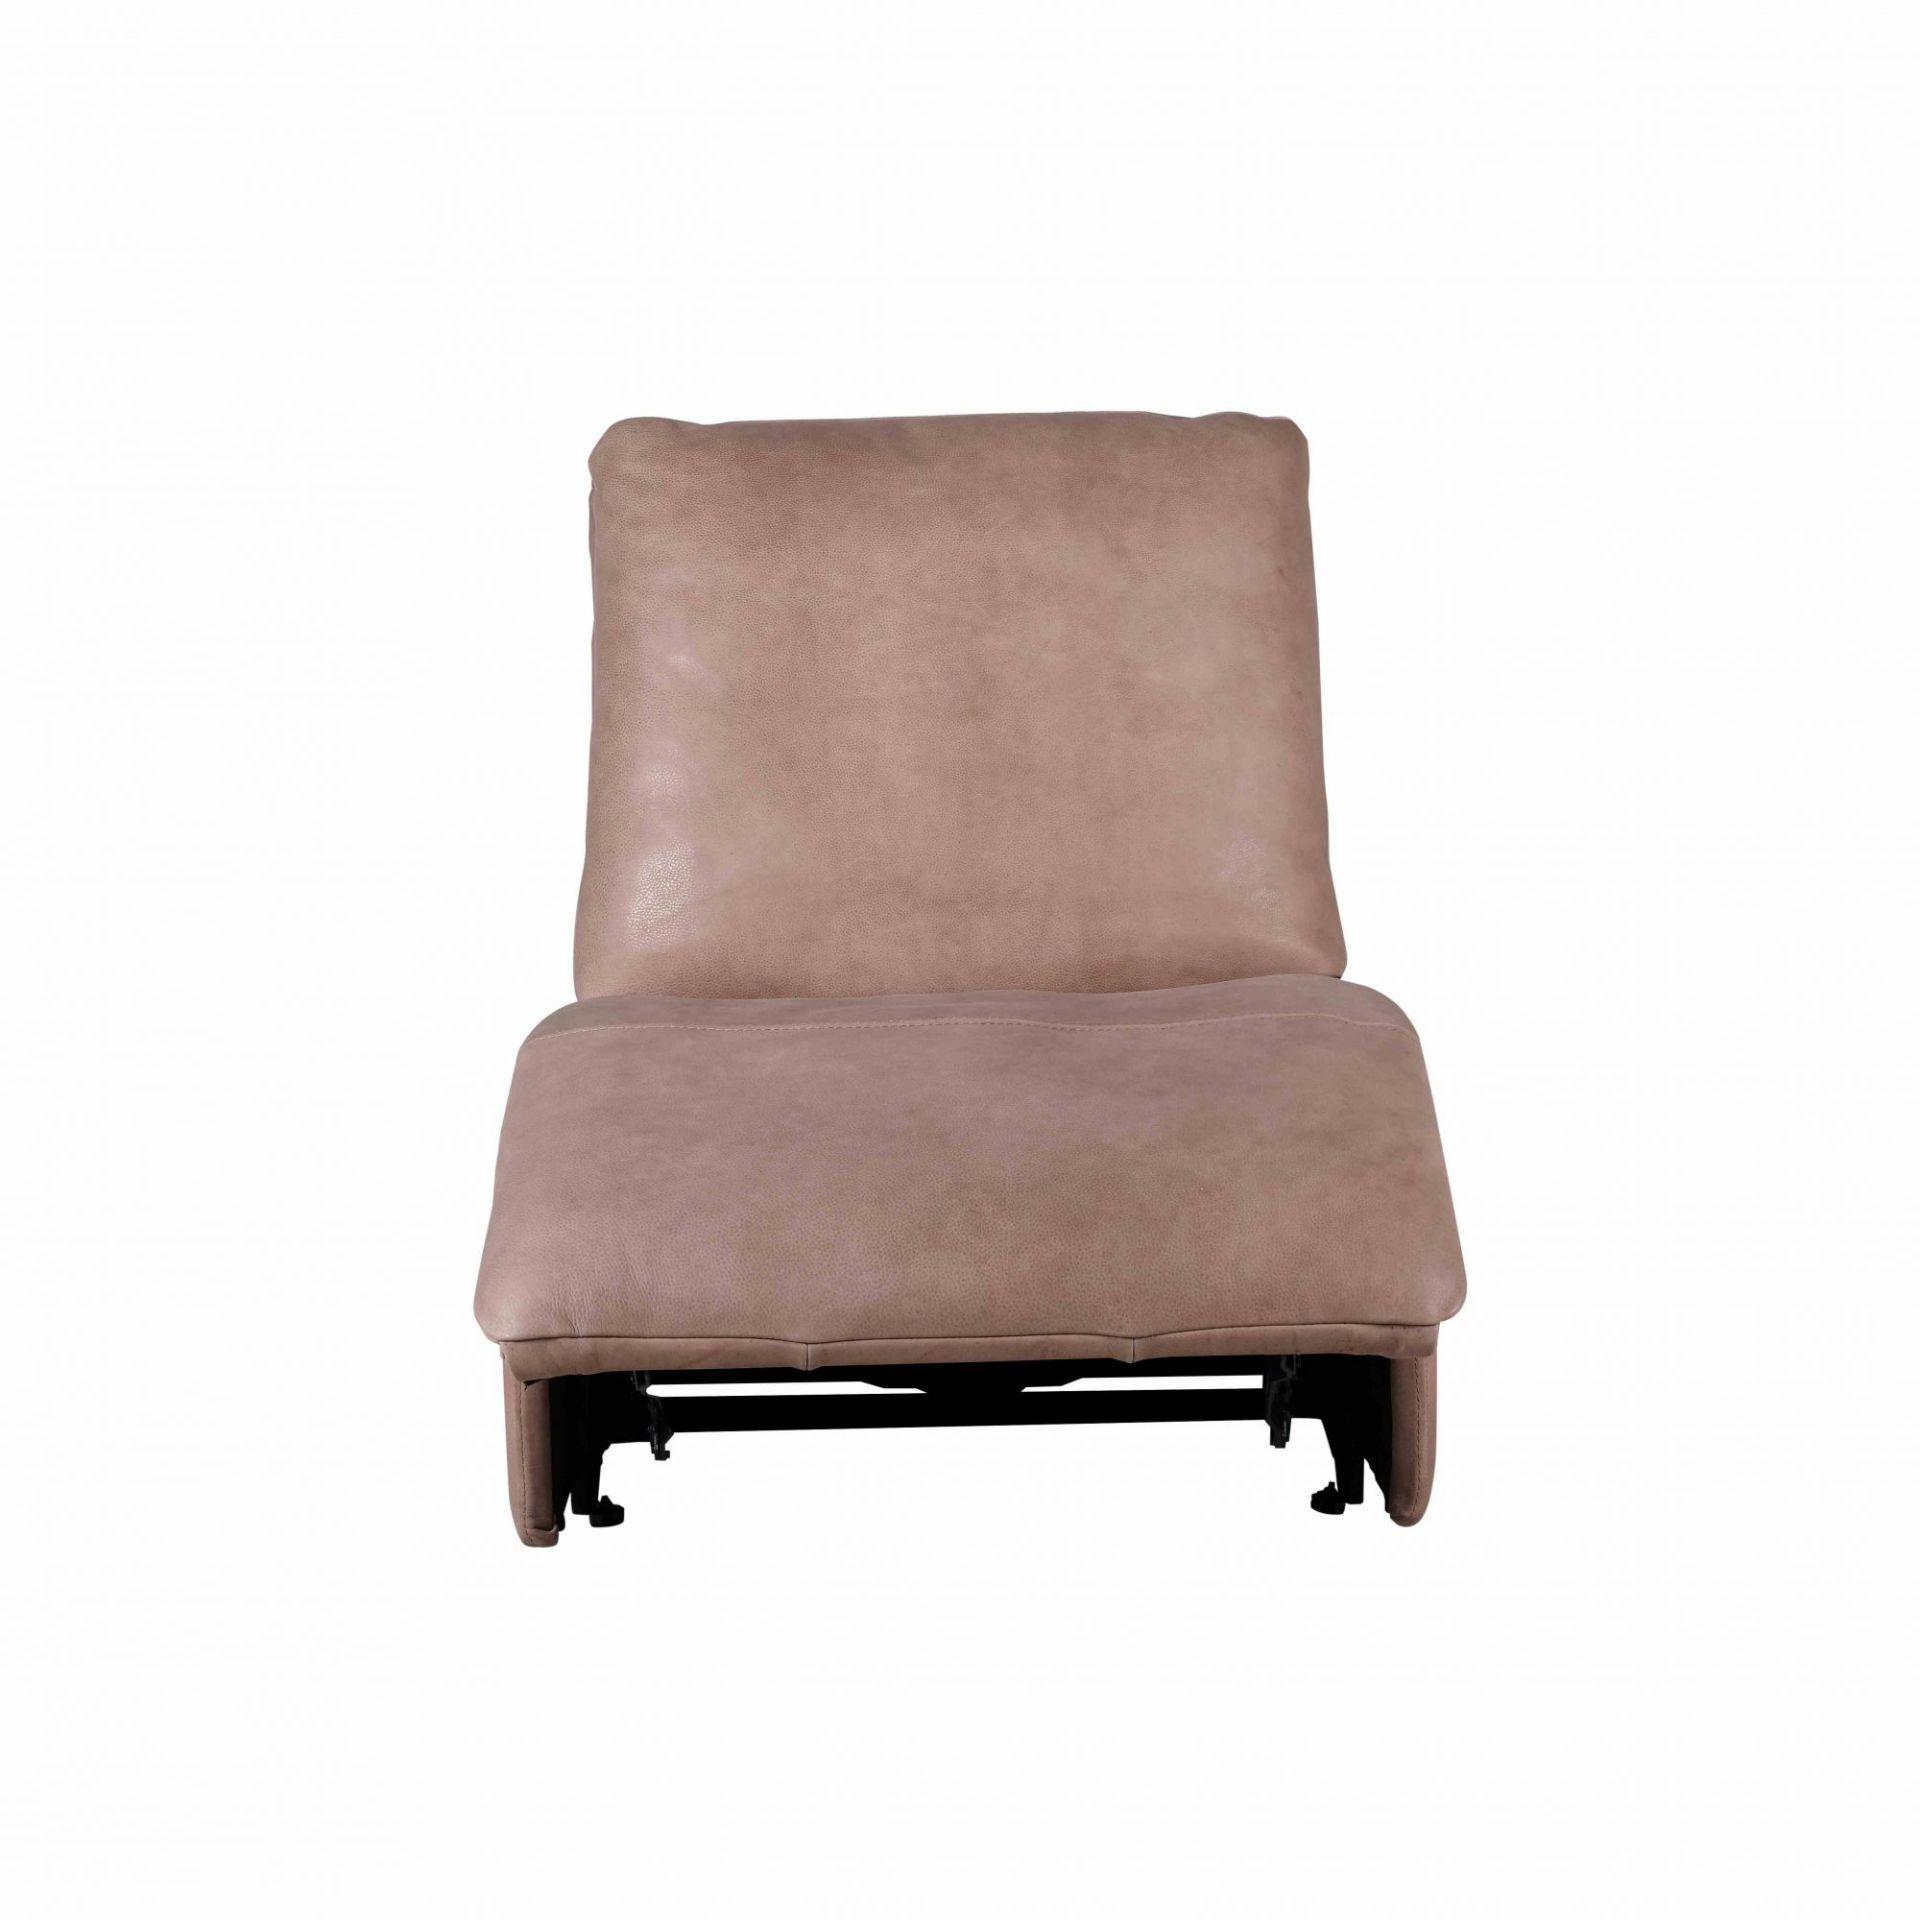 George Chair 1 Seater Sofa Graphite The George Is A Contemporary Armless Recliner Featuring Simple - Image 2 of 5